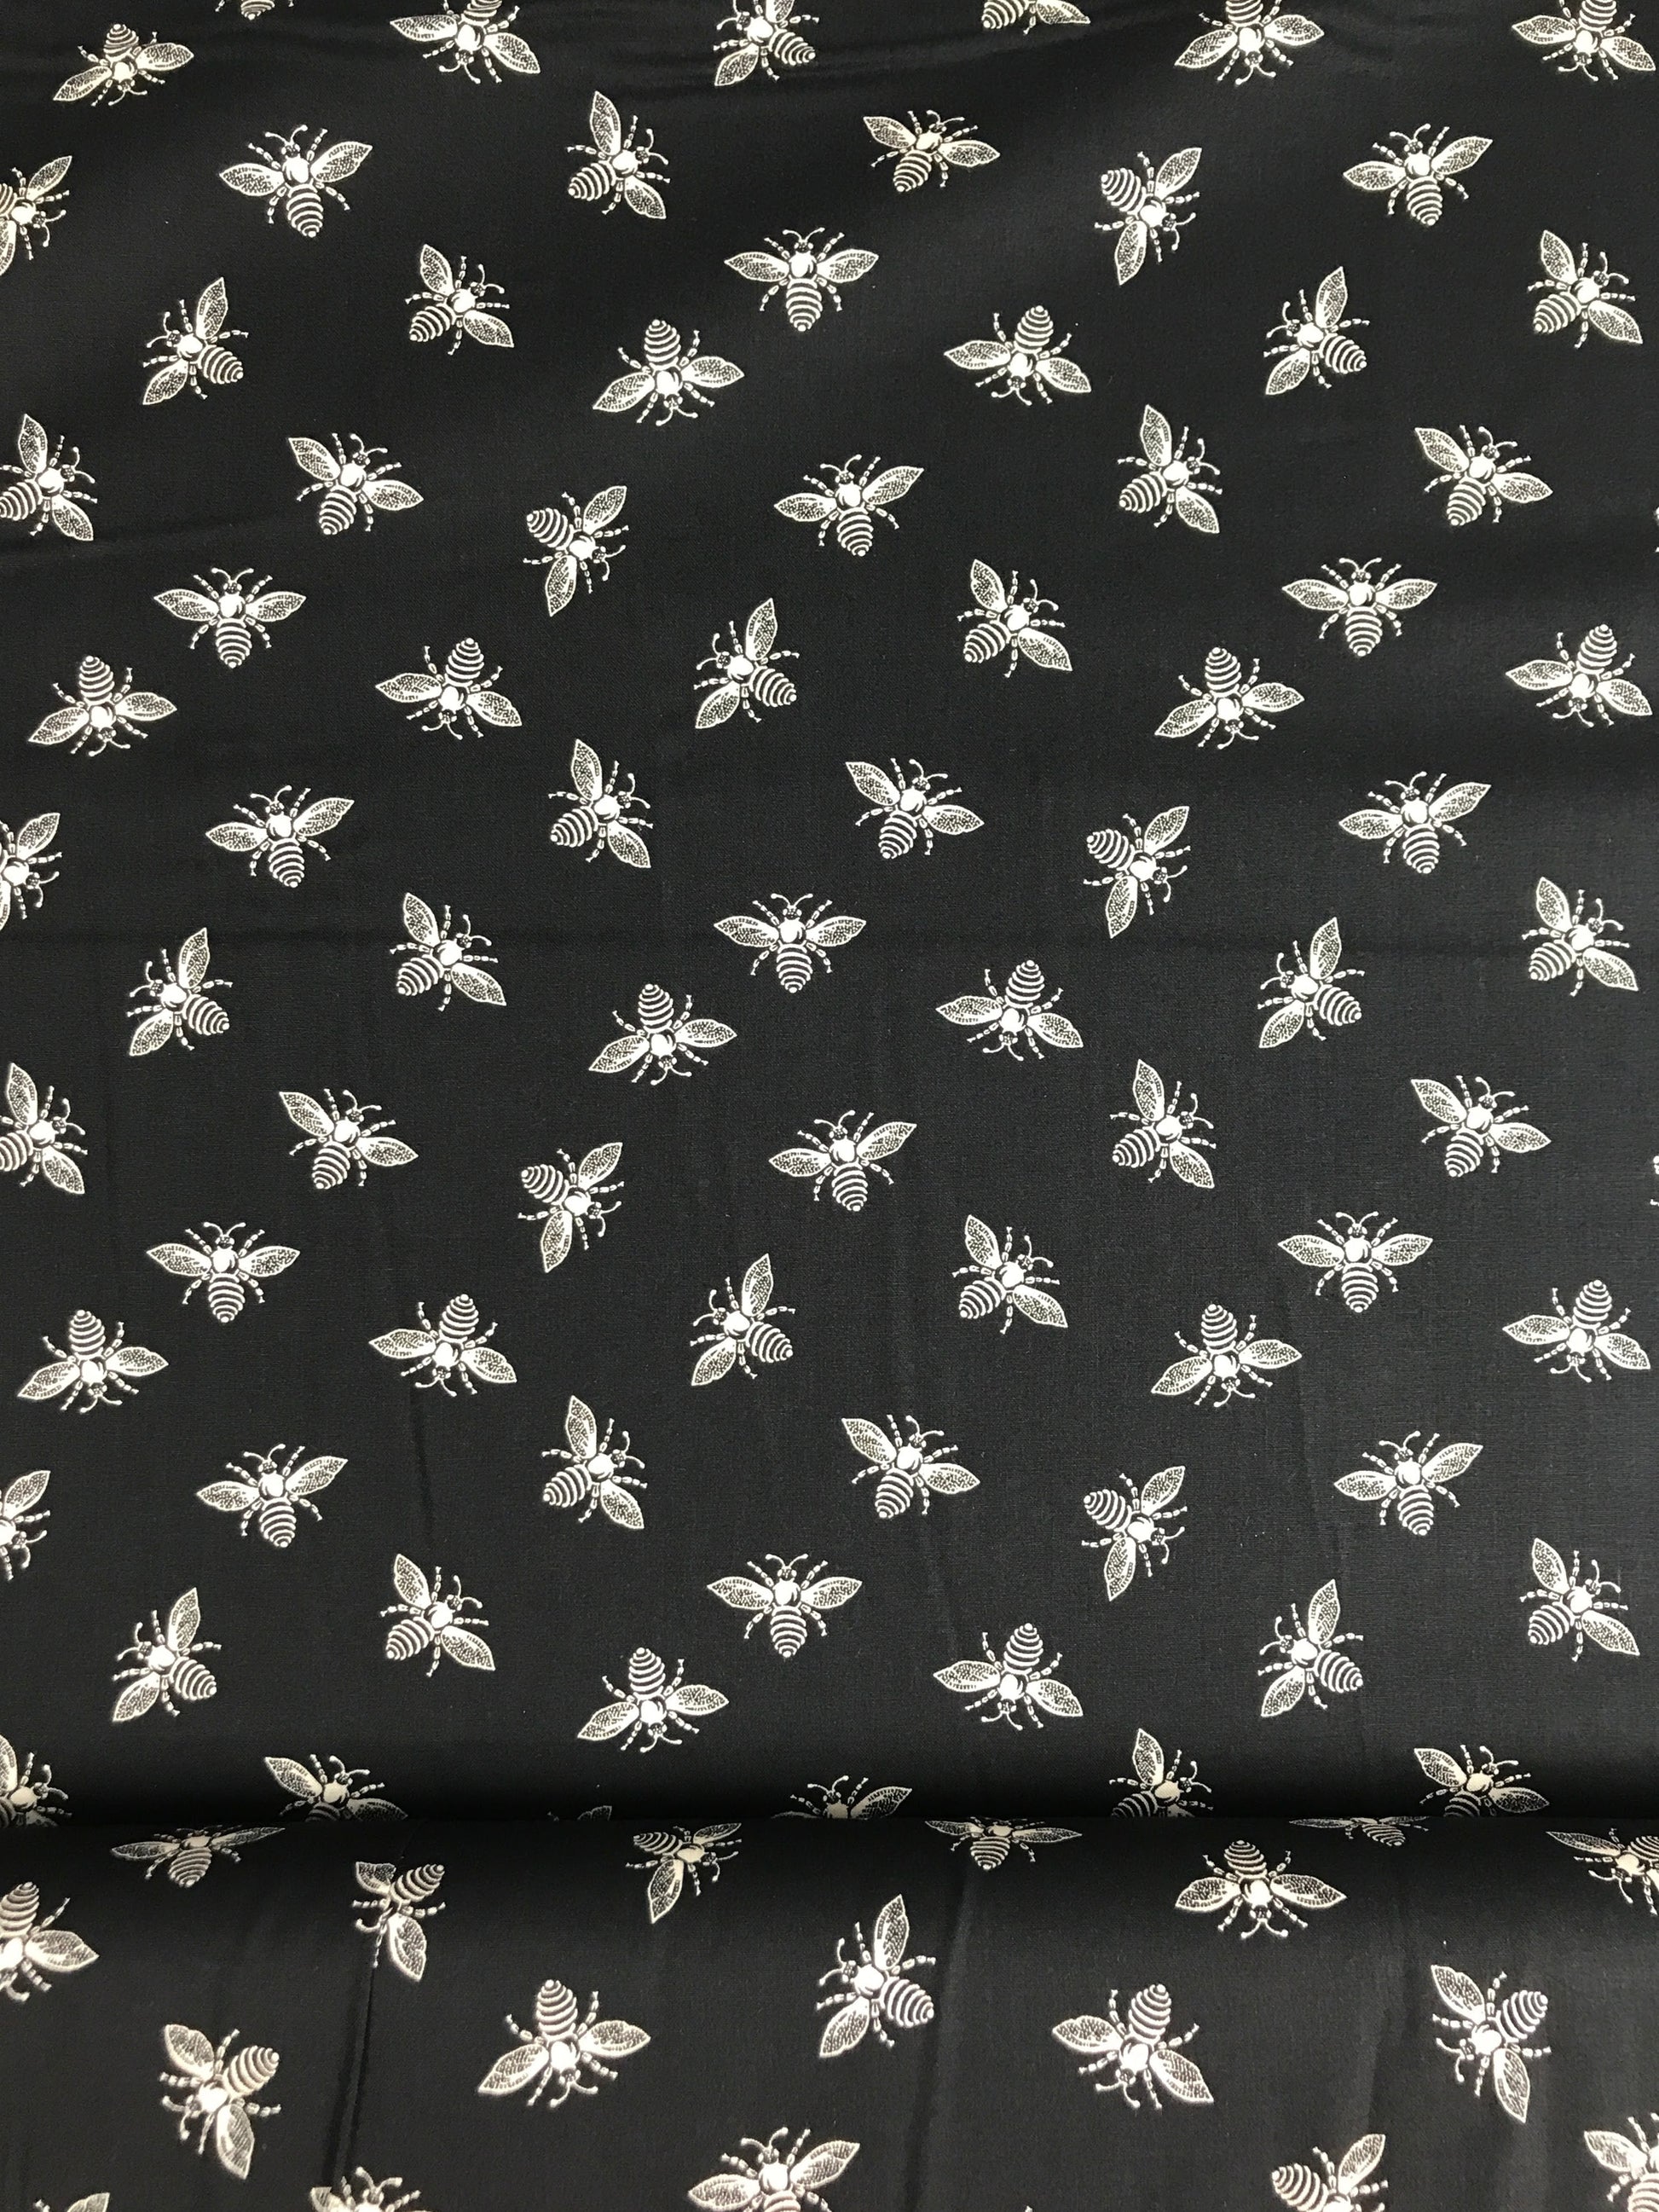 andover fabrics french bee renee nanneman french bee black quilters cotton Fabric Fetish